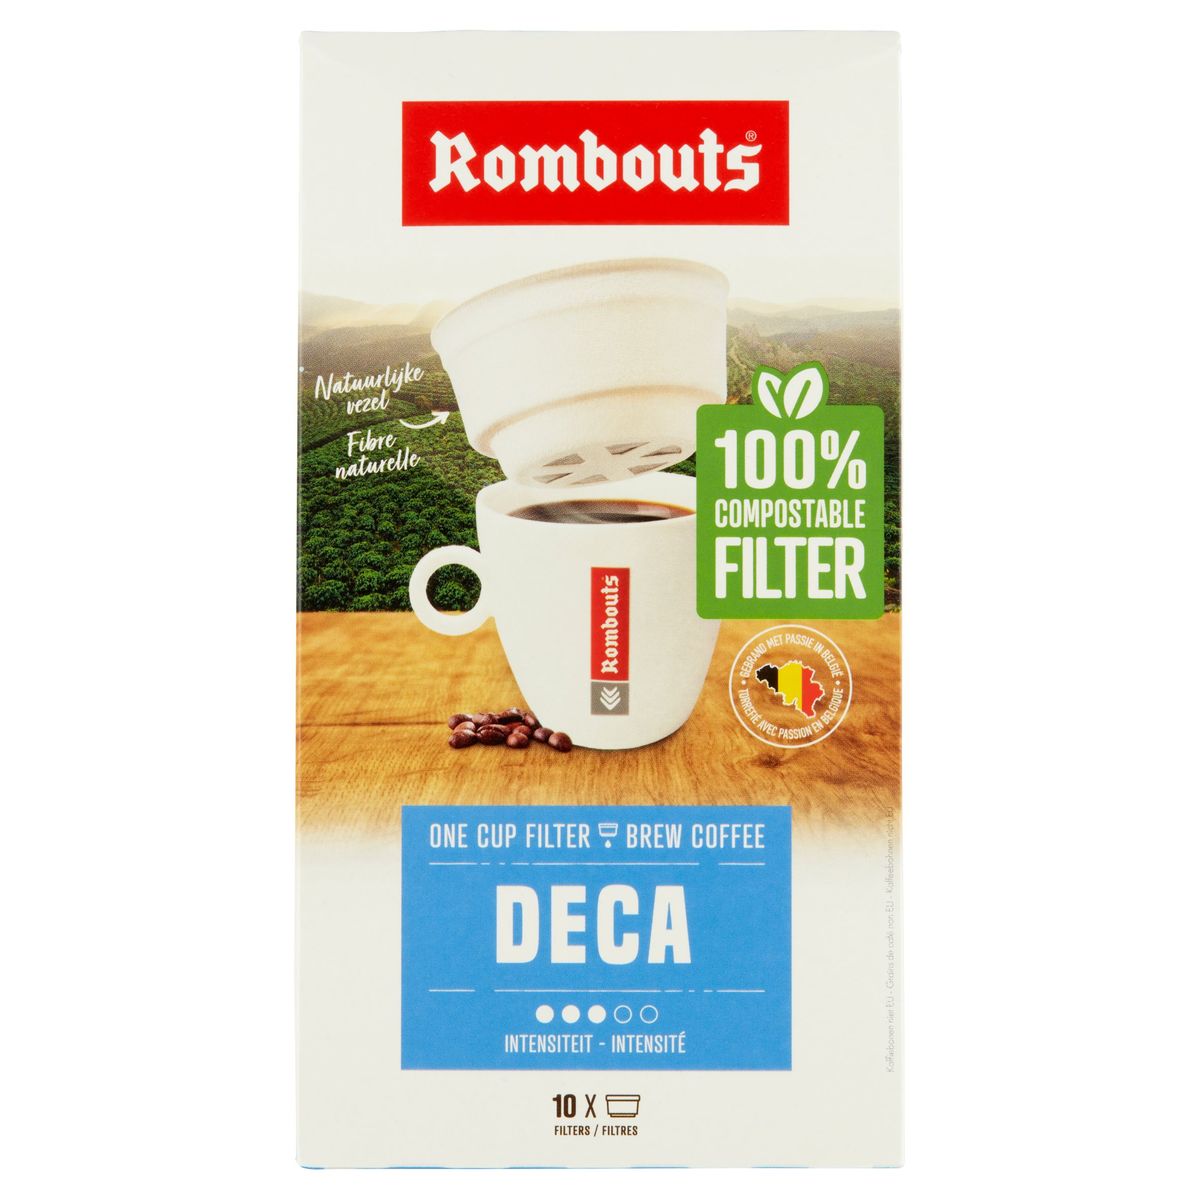 Rombouts Deca 10 Filters 70 g